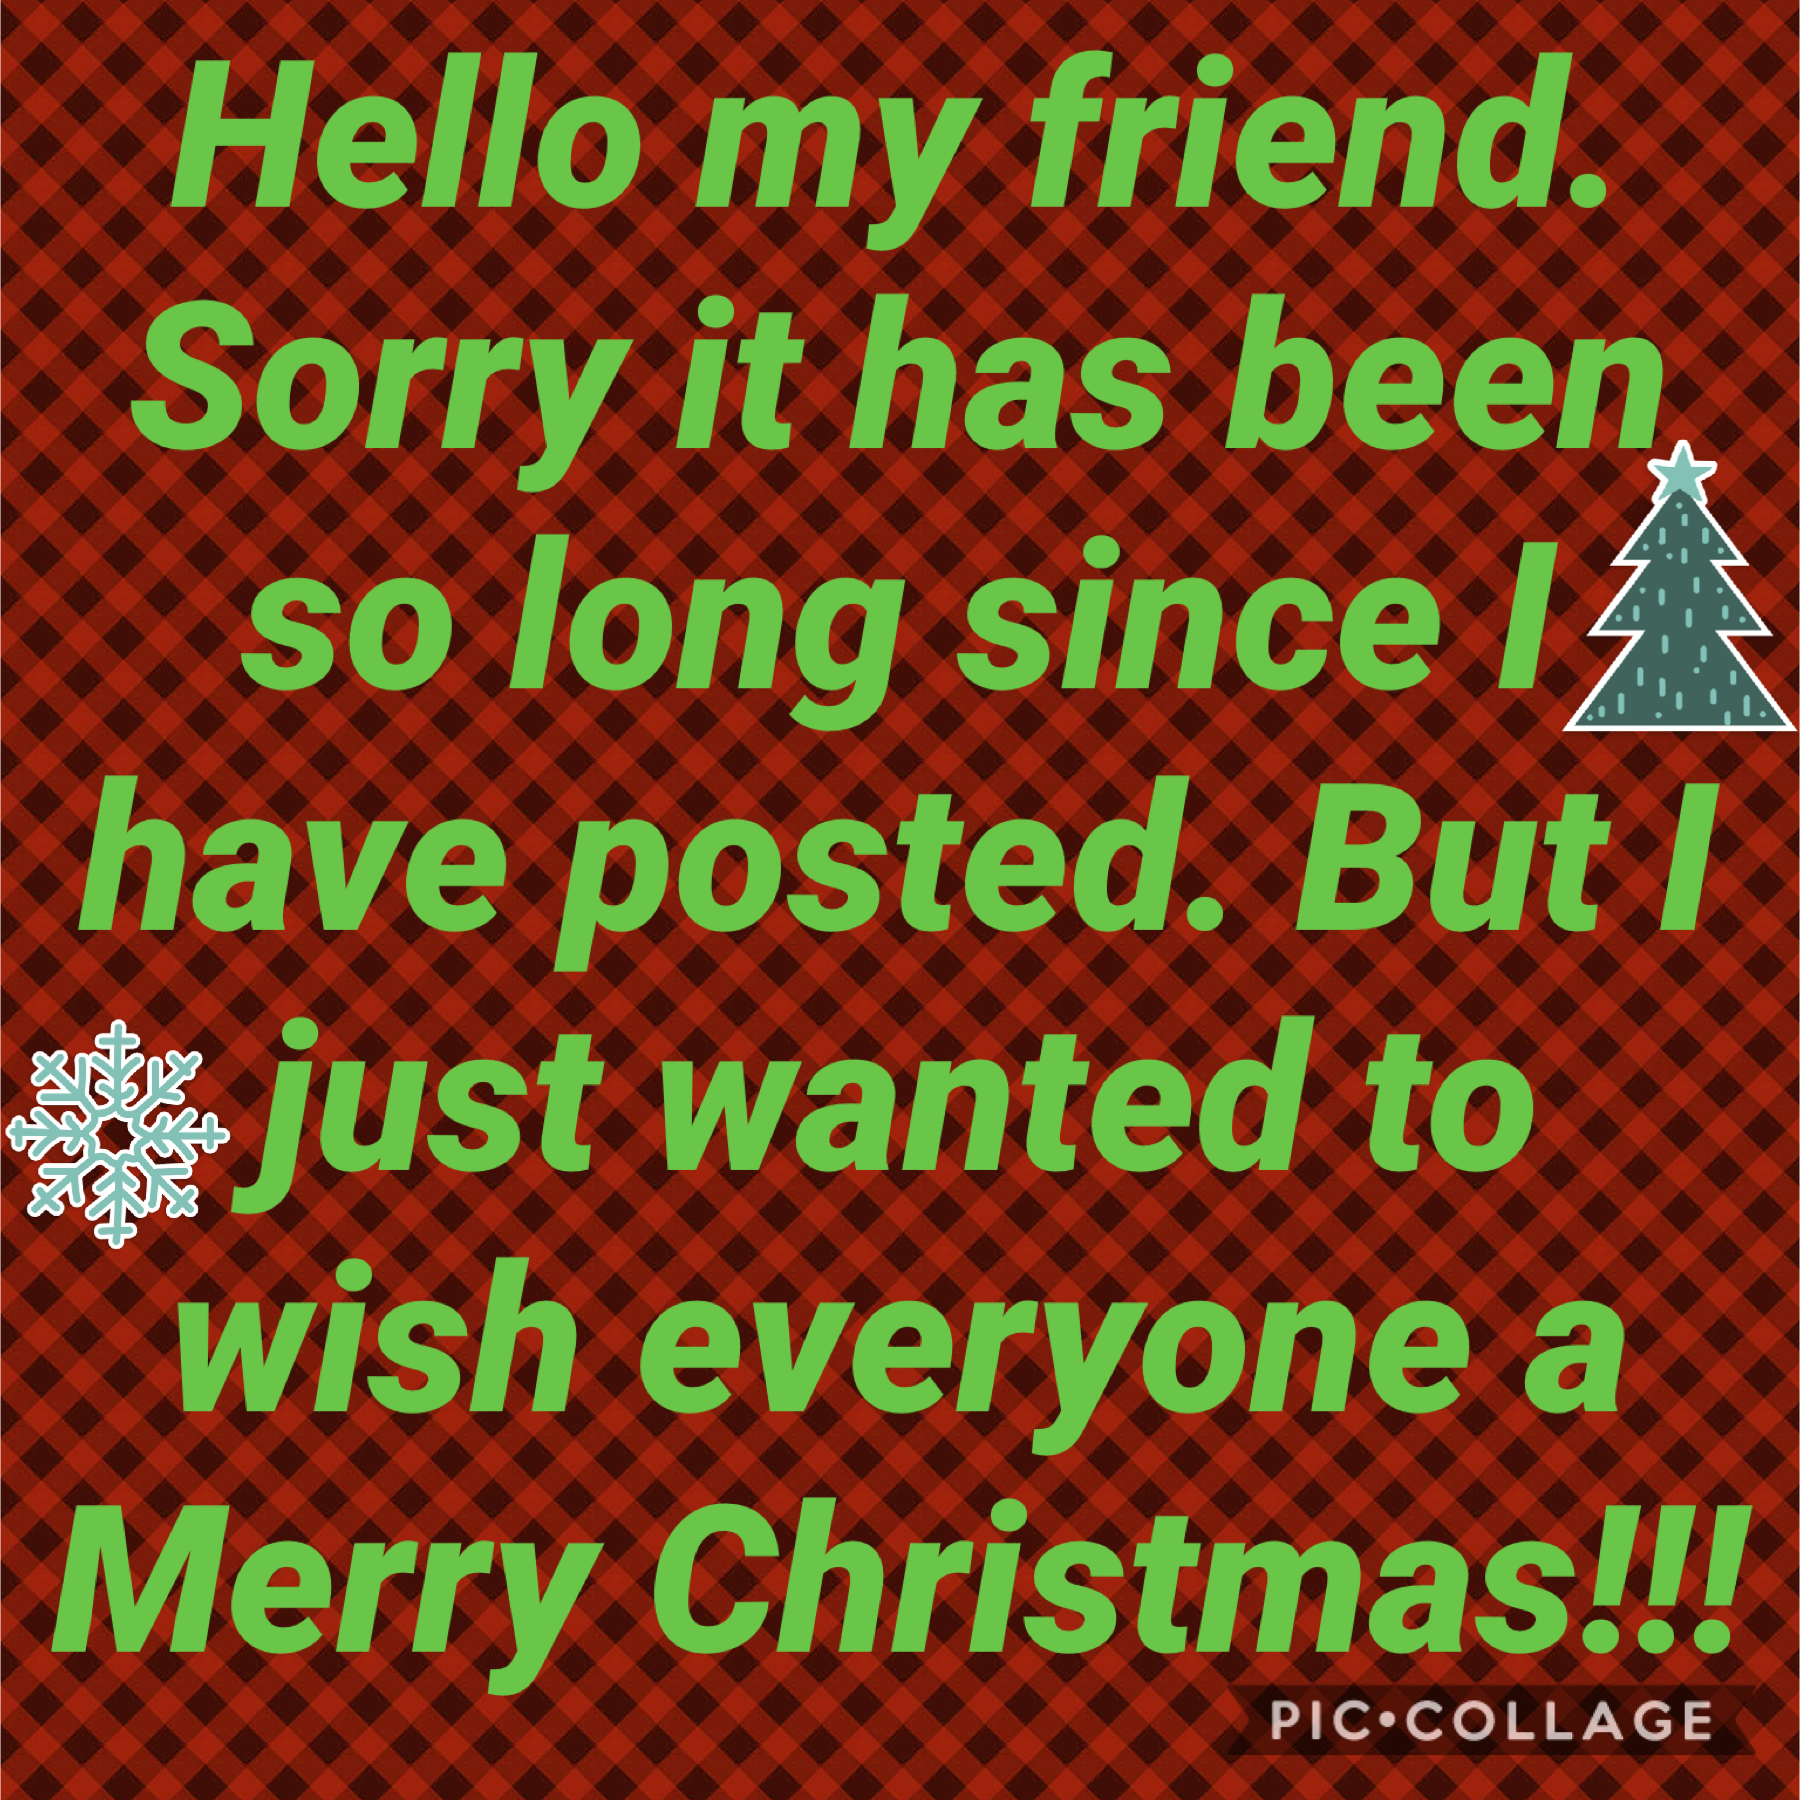 Merry Christmas!!! So sorry for not posting in a while.